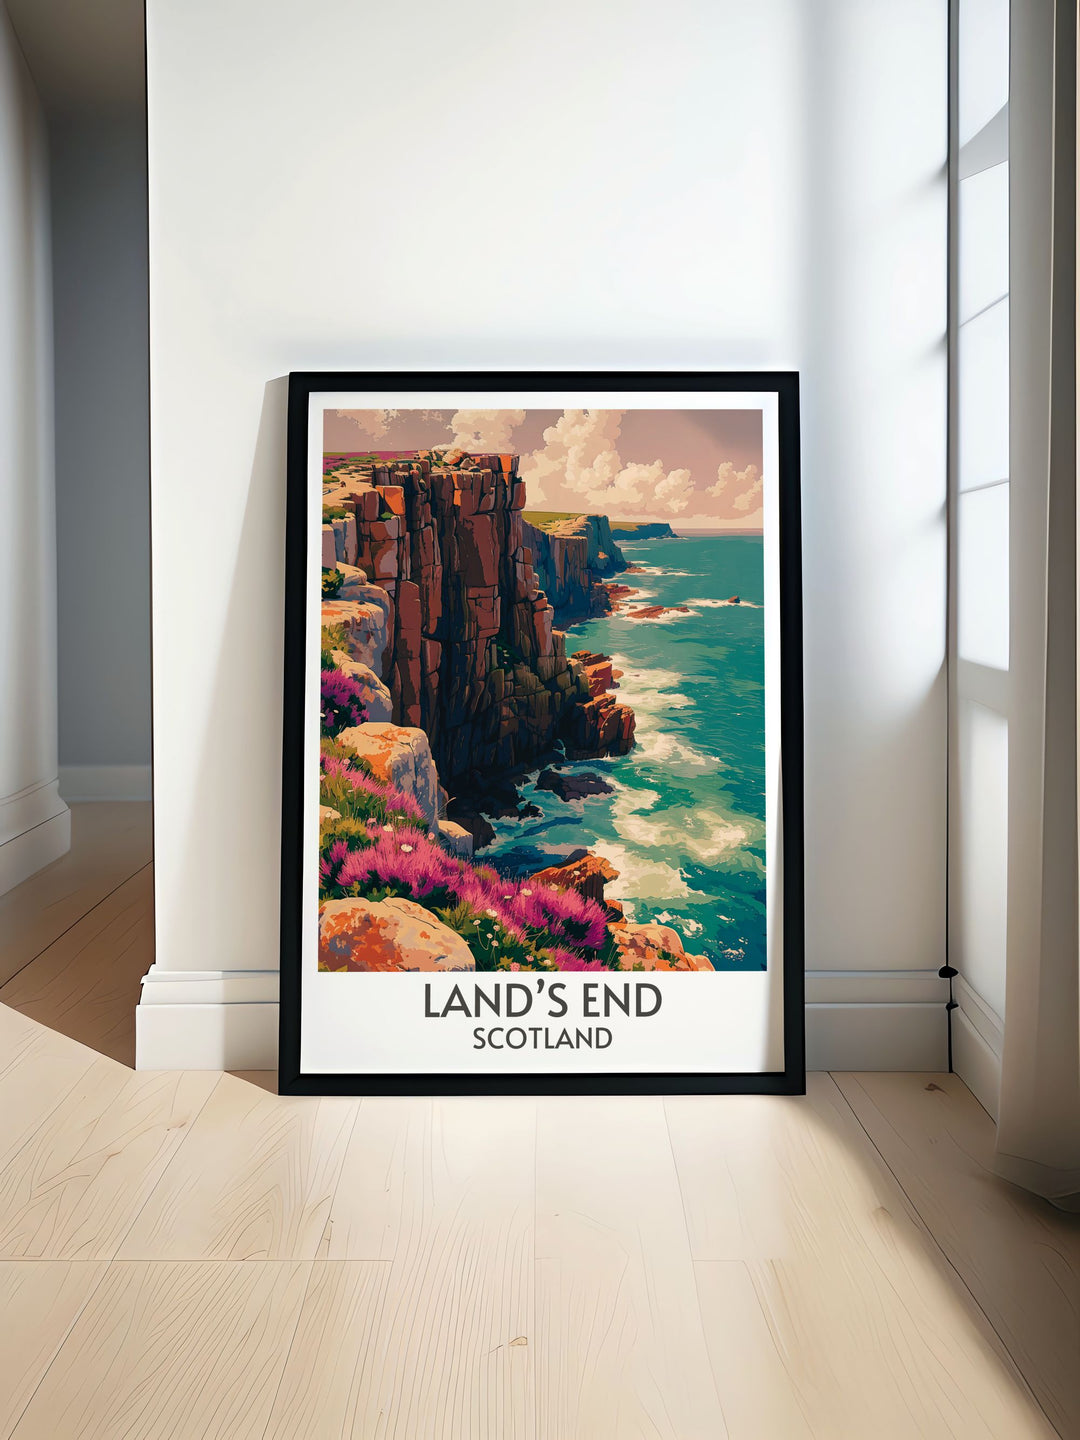 The South West Coast Gallery Wall Art captures the breathtaking beauty of Englands coastal regions with its dramatic cliffs and rolling waves, perfect for any home decor. The art features the serene landscapes of Devon and Cornwall, bringing natures grandeur into your space.